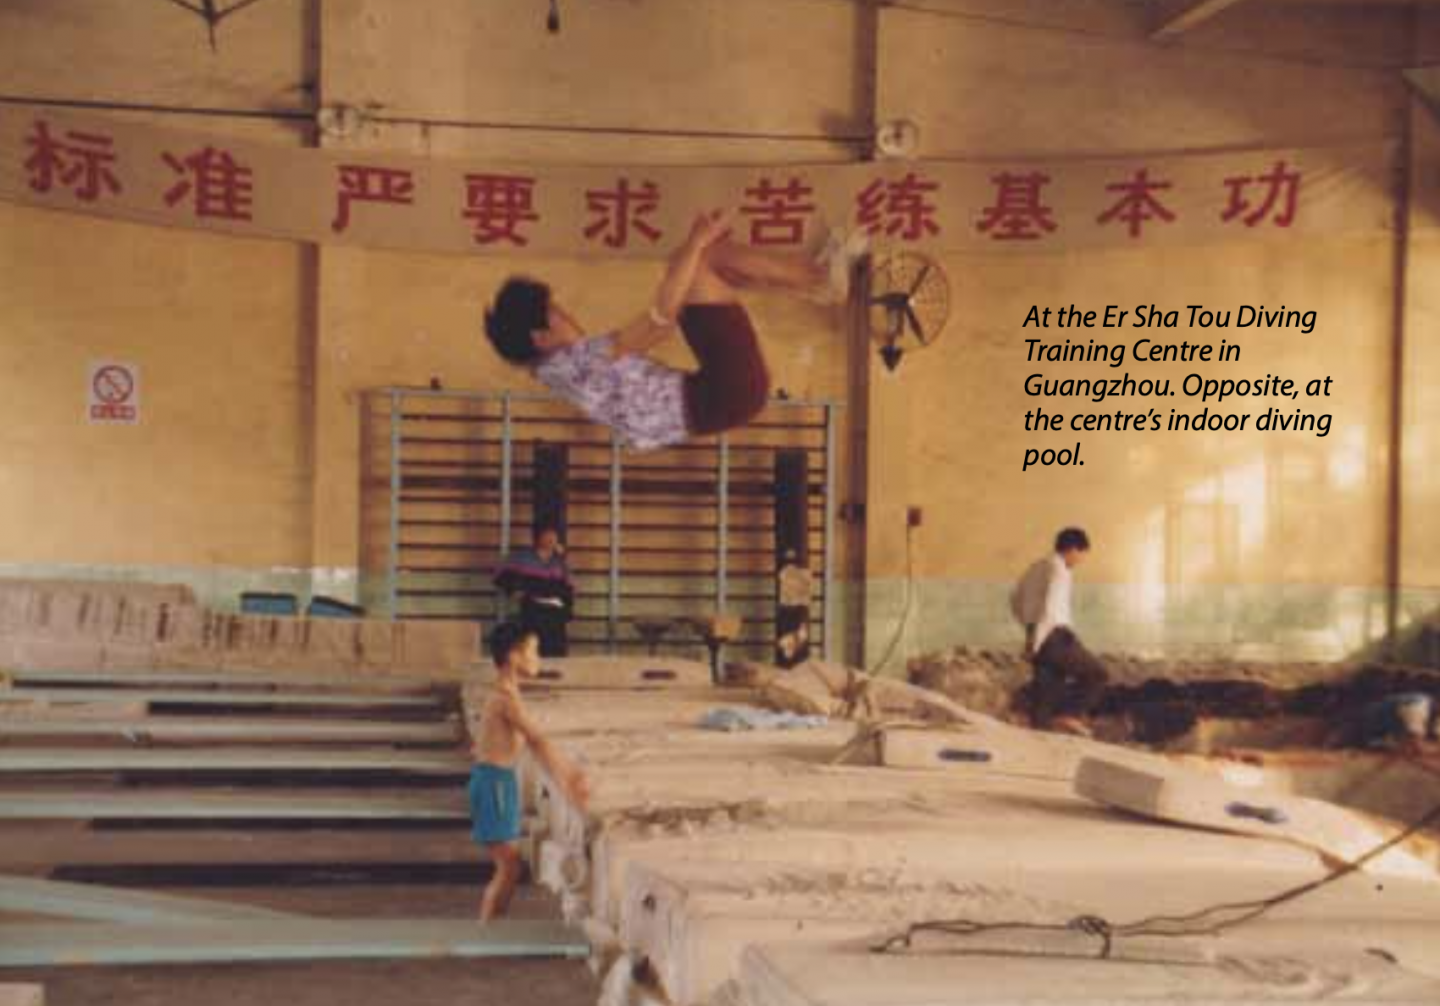 16-year-old Eileen at the diving training centre in Guangzhou